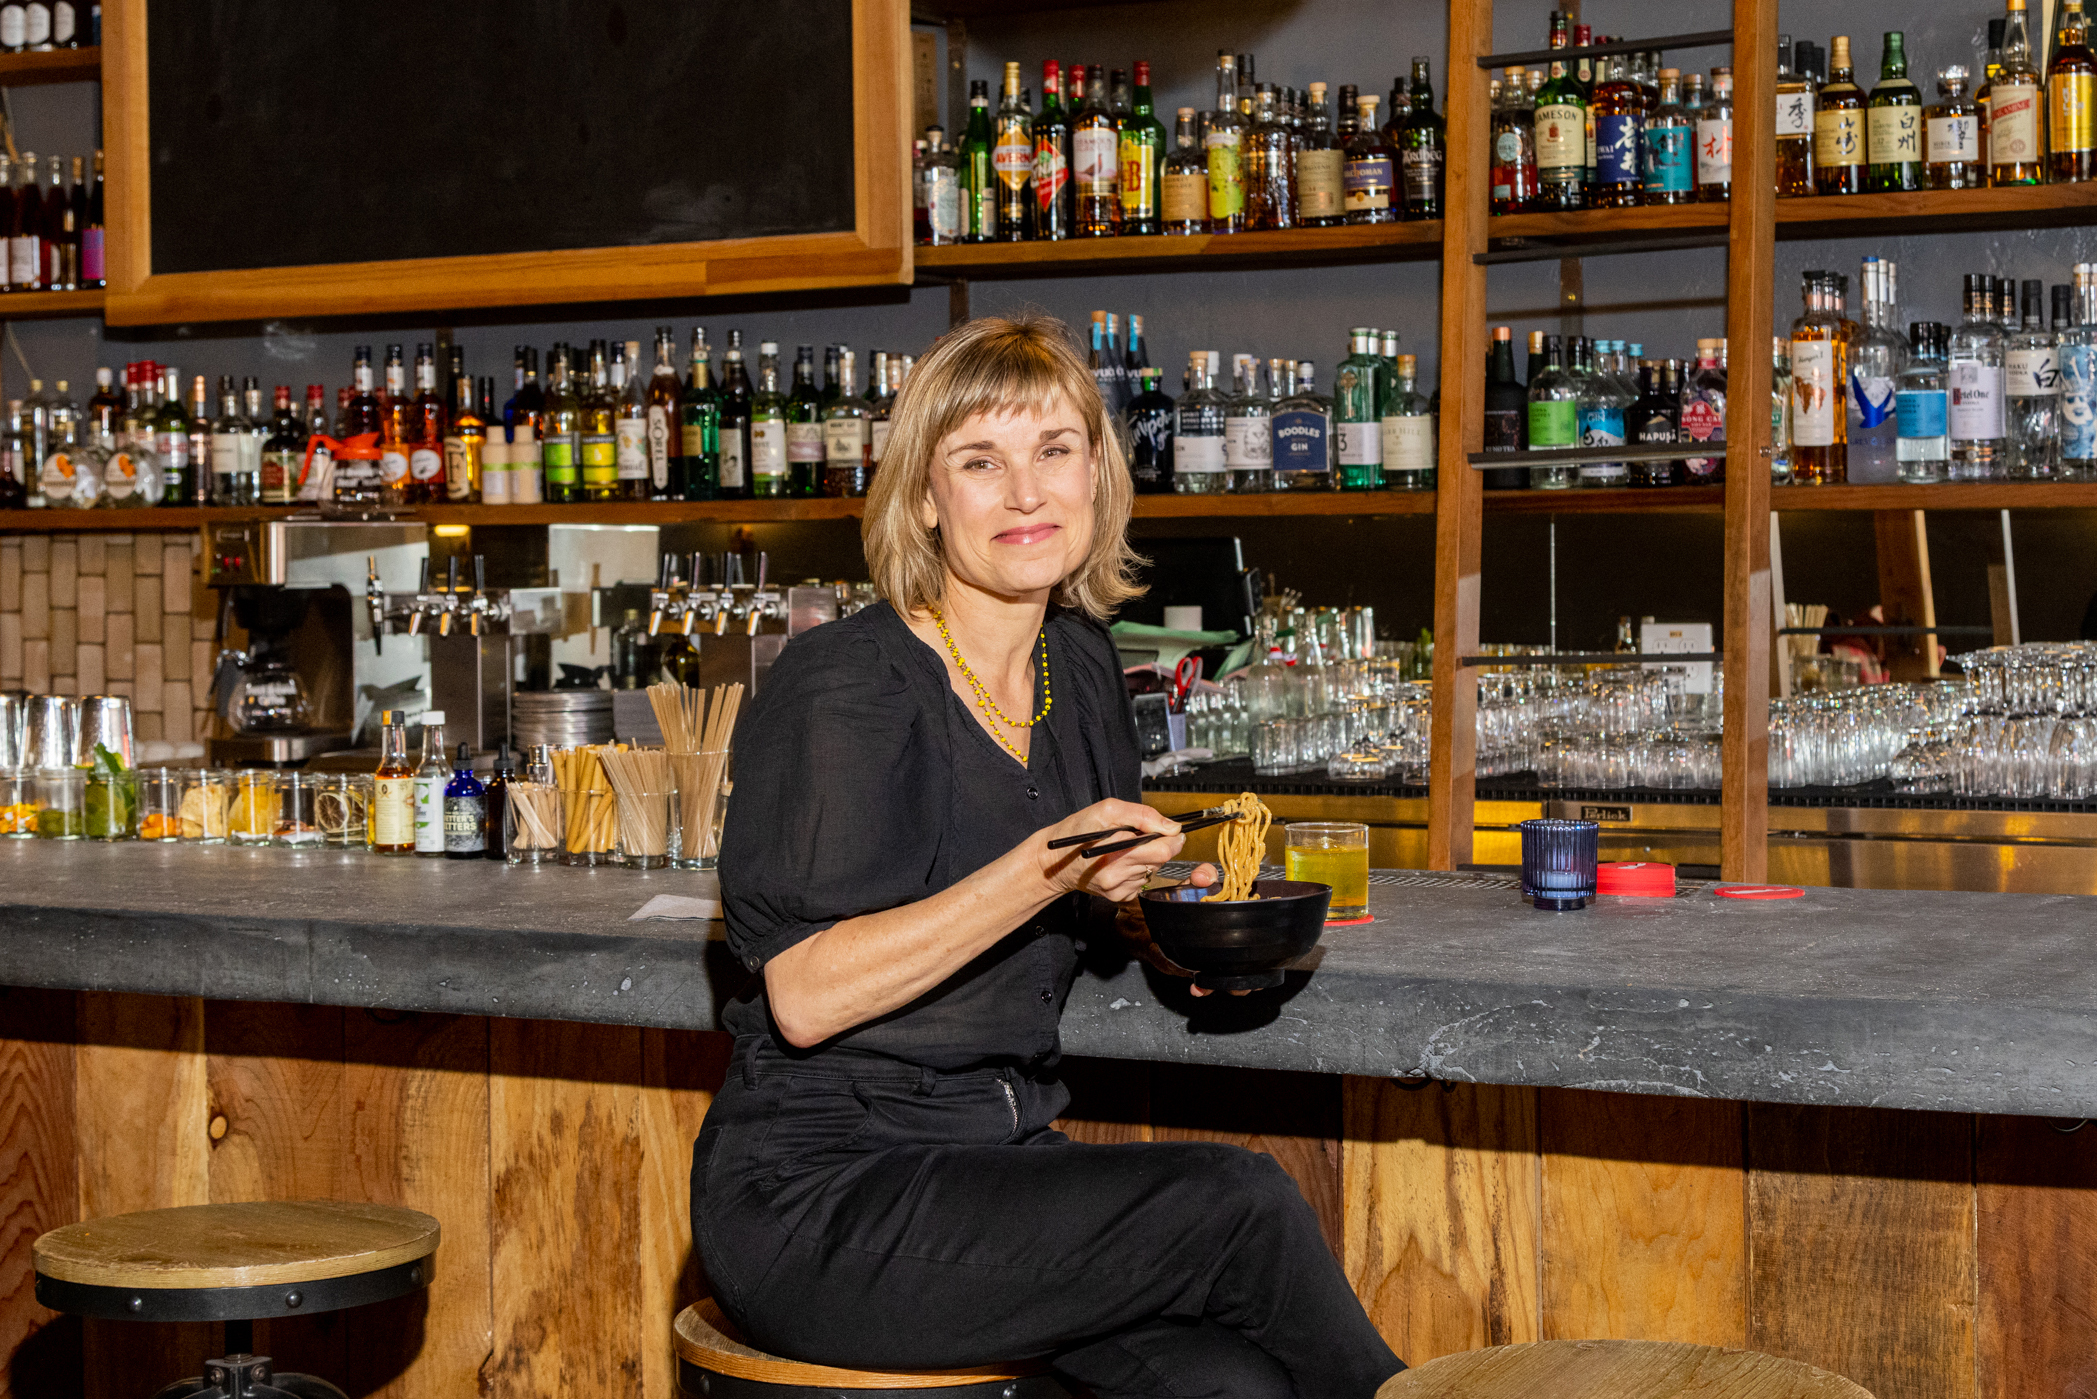 A woman is smiling at a bar, holding a bowl, with shelves of liquor bottles behind her.